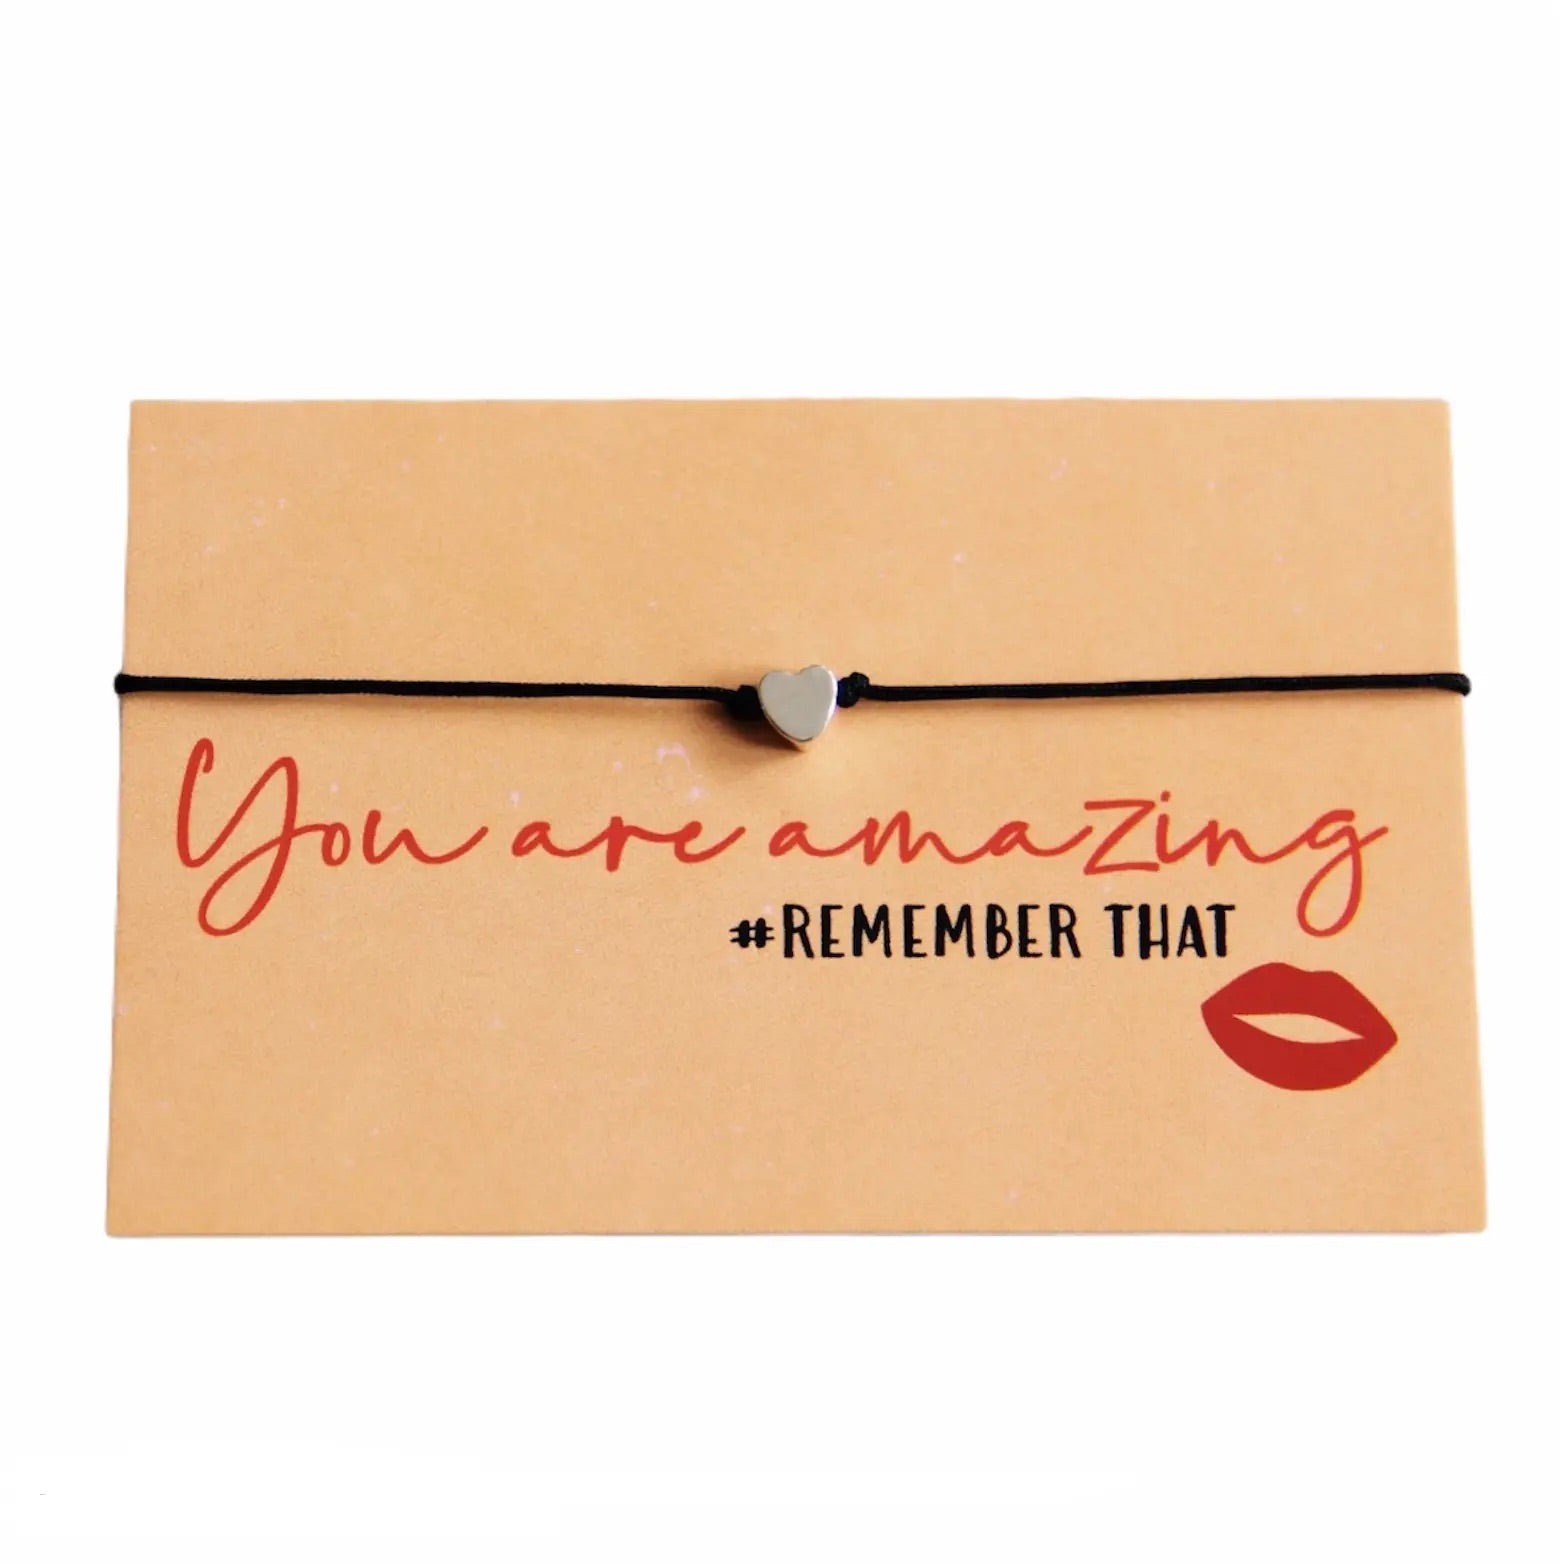 Wish Card “You are amazing”